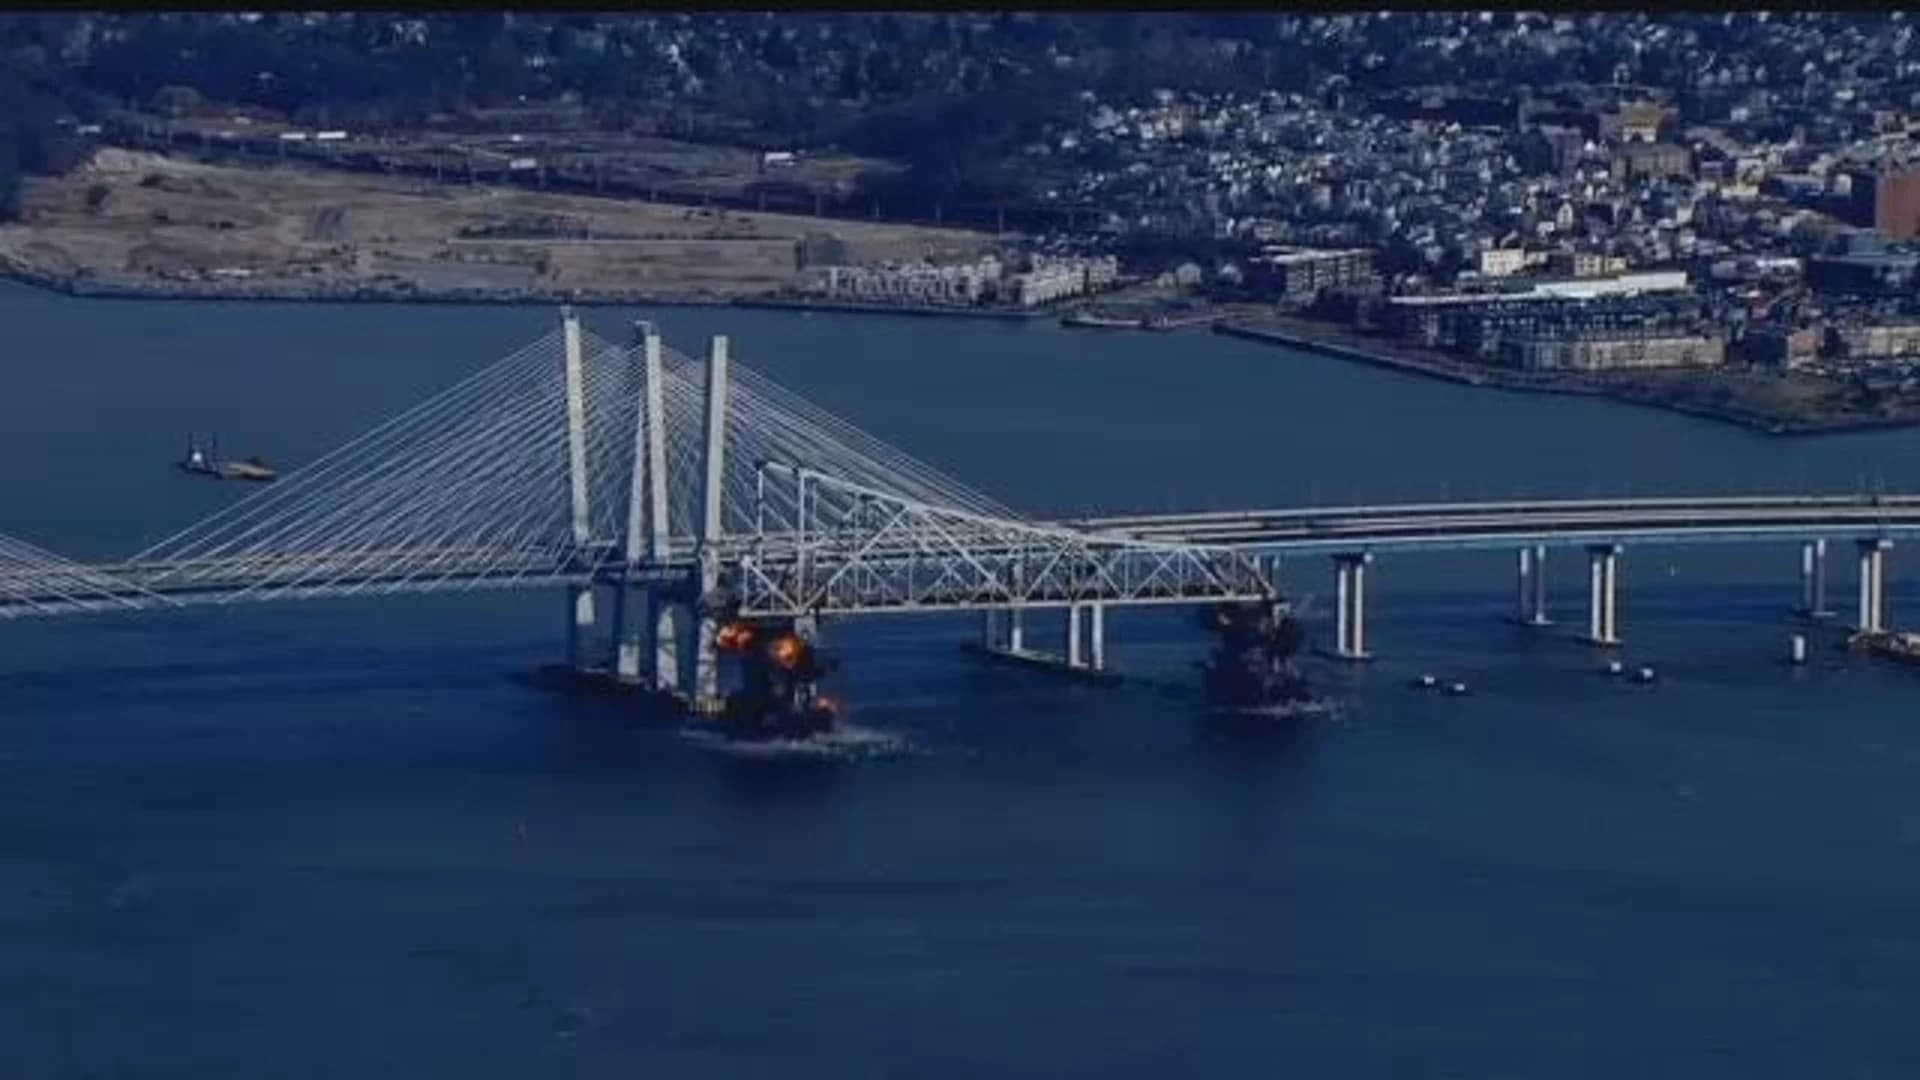 VIEW: Old Tappan Zee Bridge gets demolished with explosives